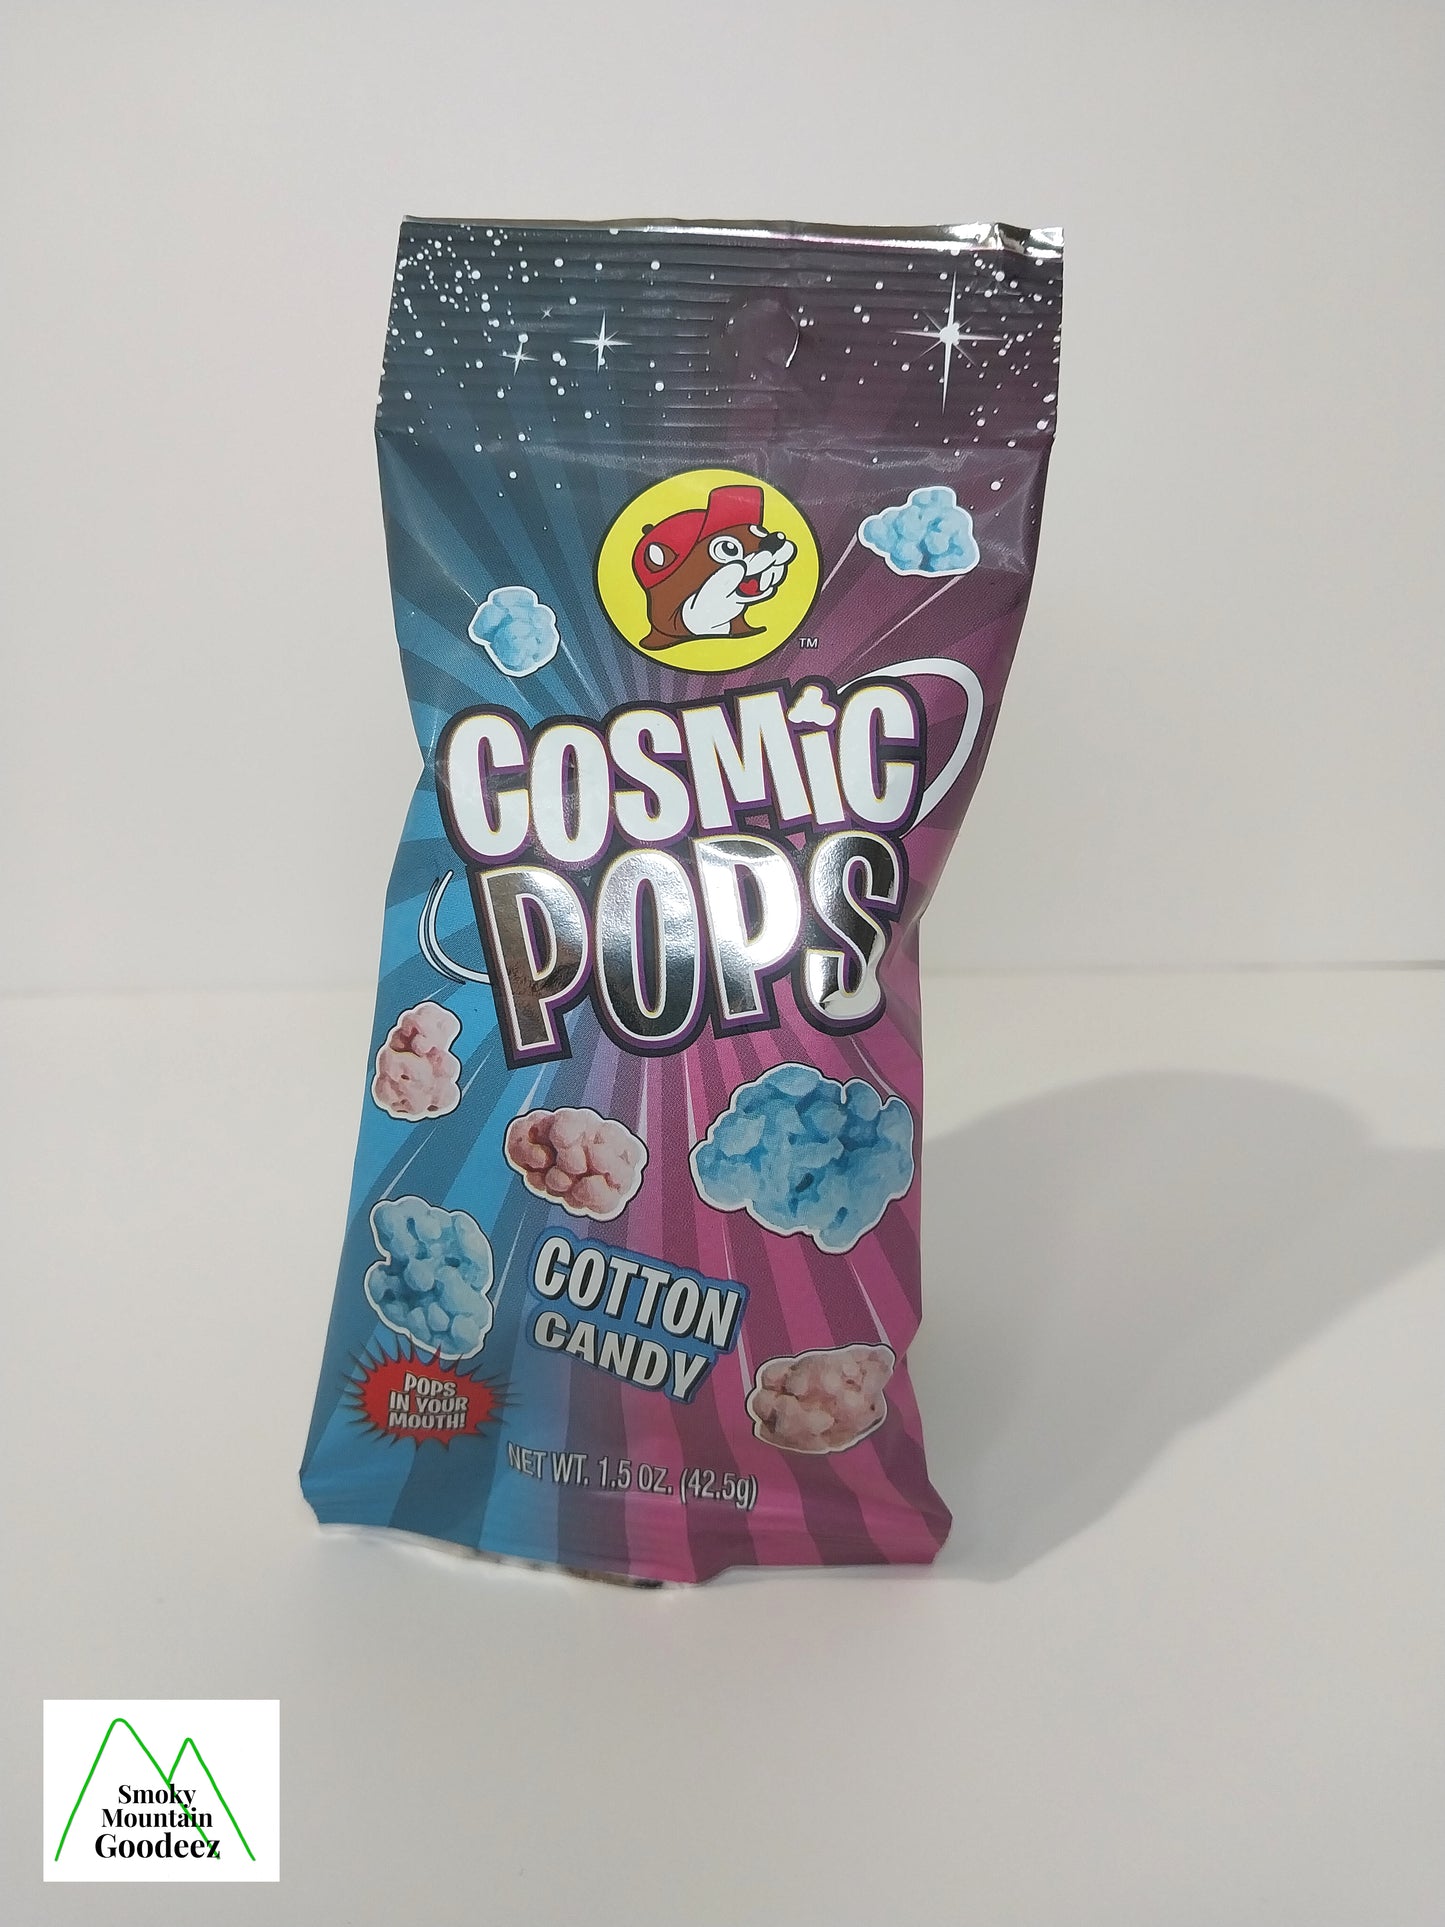 Buc-ee's Cotton Candy Cosmic Pops Amazing Candy